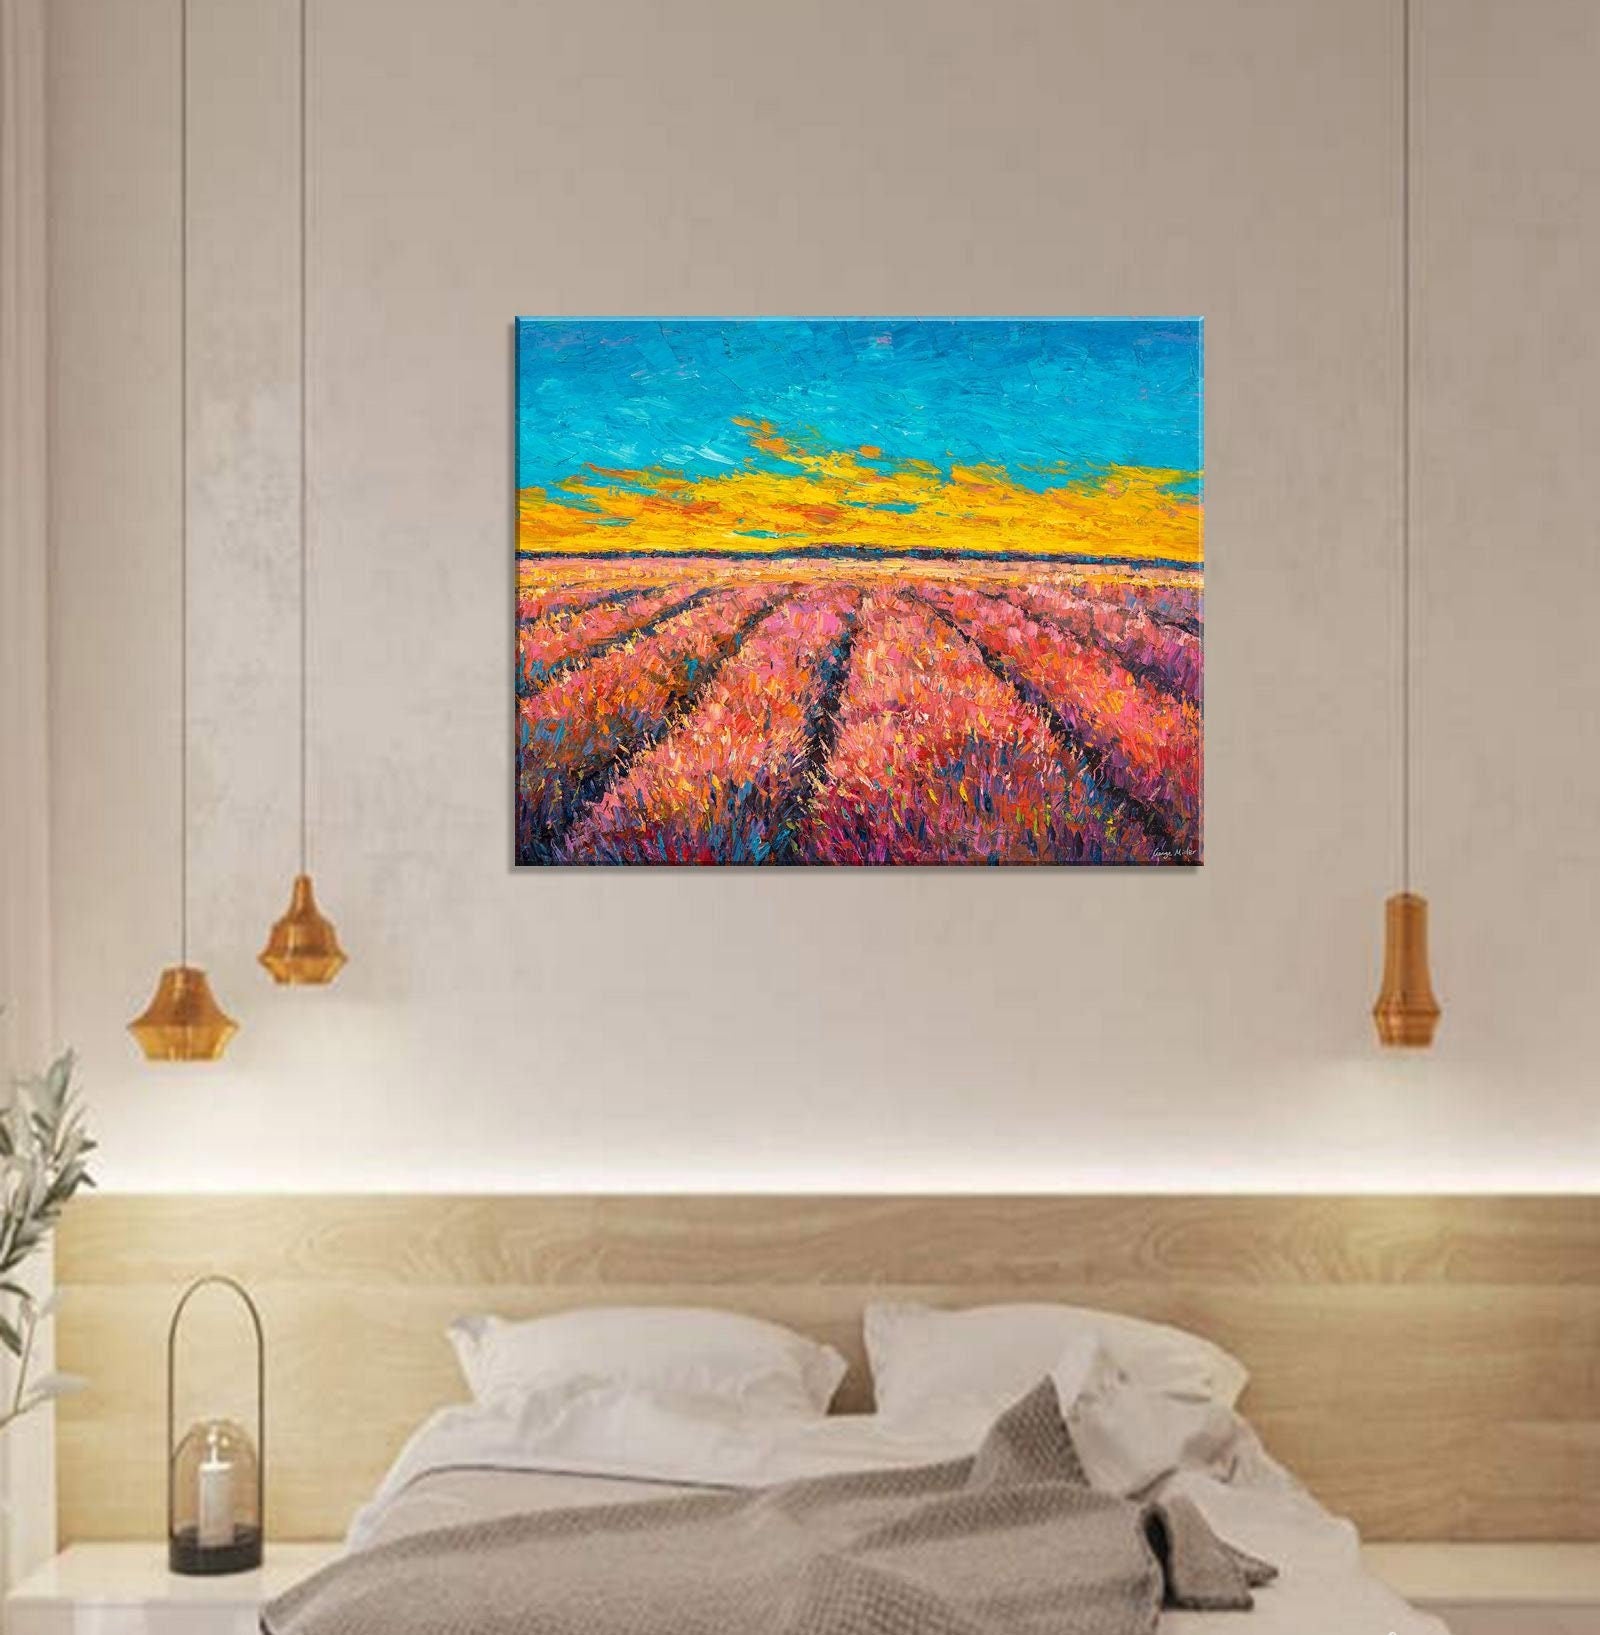 Original Abstract Landcape Painting, Fine Art, Oil On Canvas Painting, Large Landscape Paintings On Canvas, Large Wall Art, Modern Painting